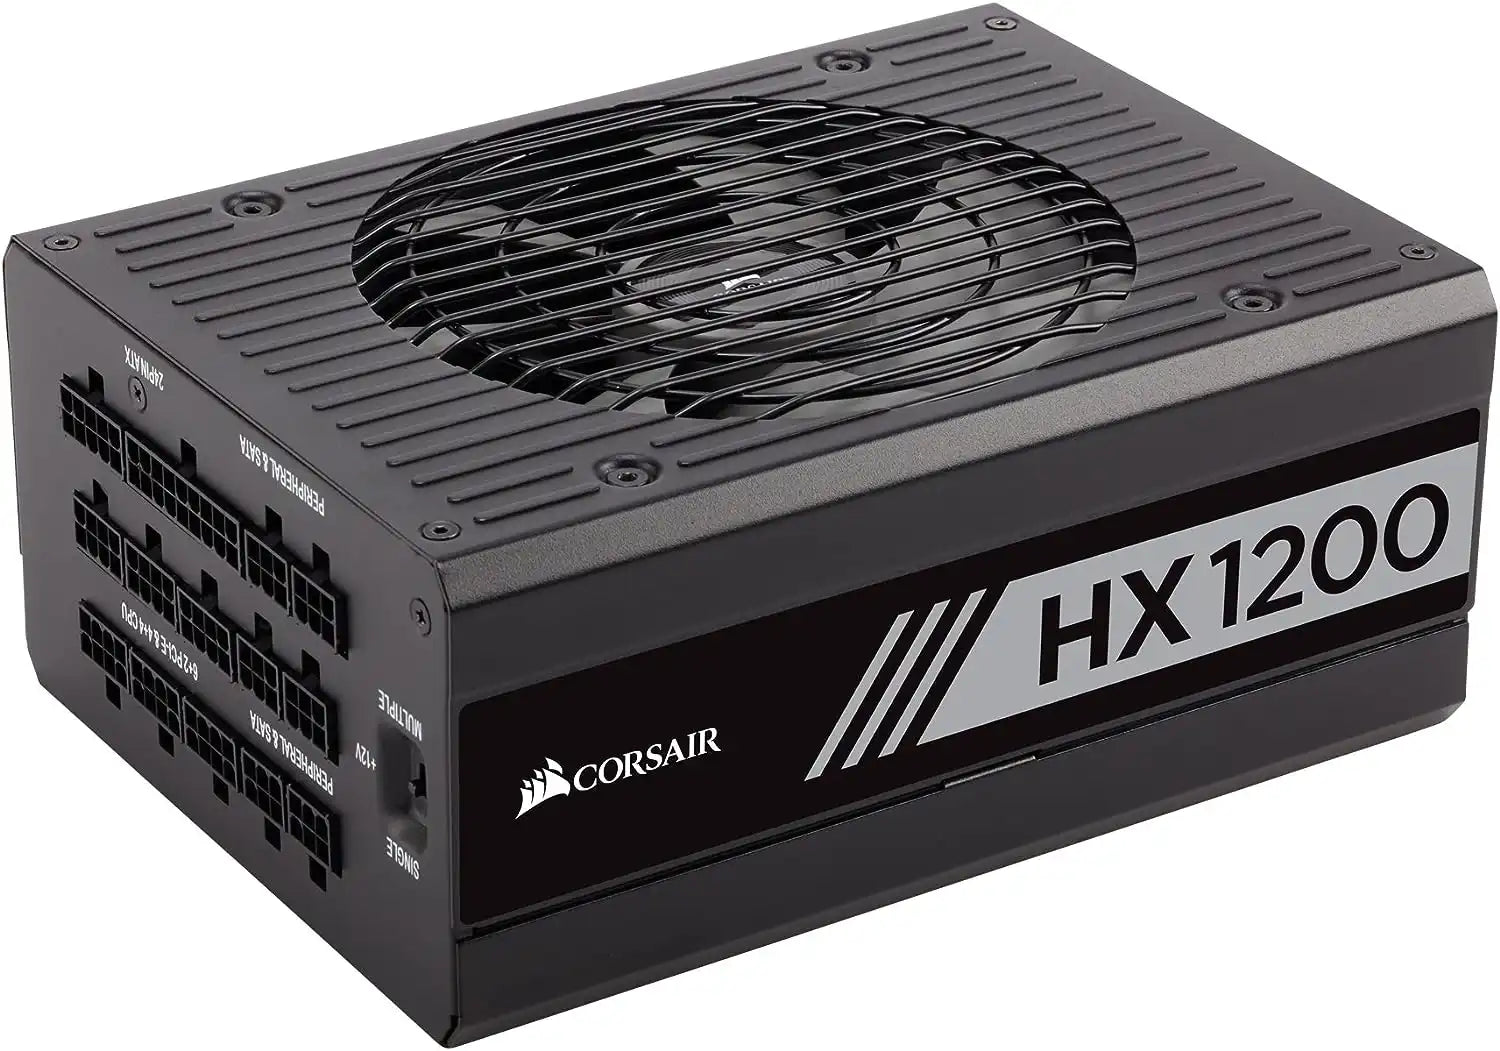 Guide of Best PSU Brands for Gamers by Prime Tech Support for Gamers Clients in Miami - Visual representation of Corsair HX1200 PSU (Power Supply Unit) for gamers in Miami